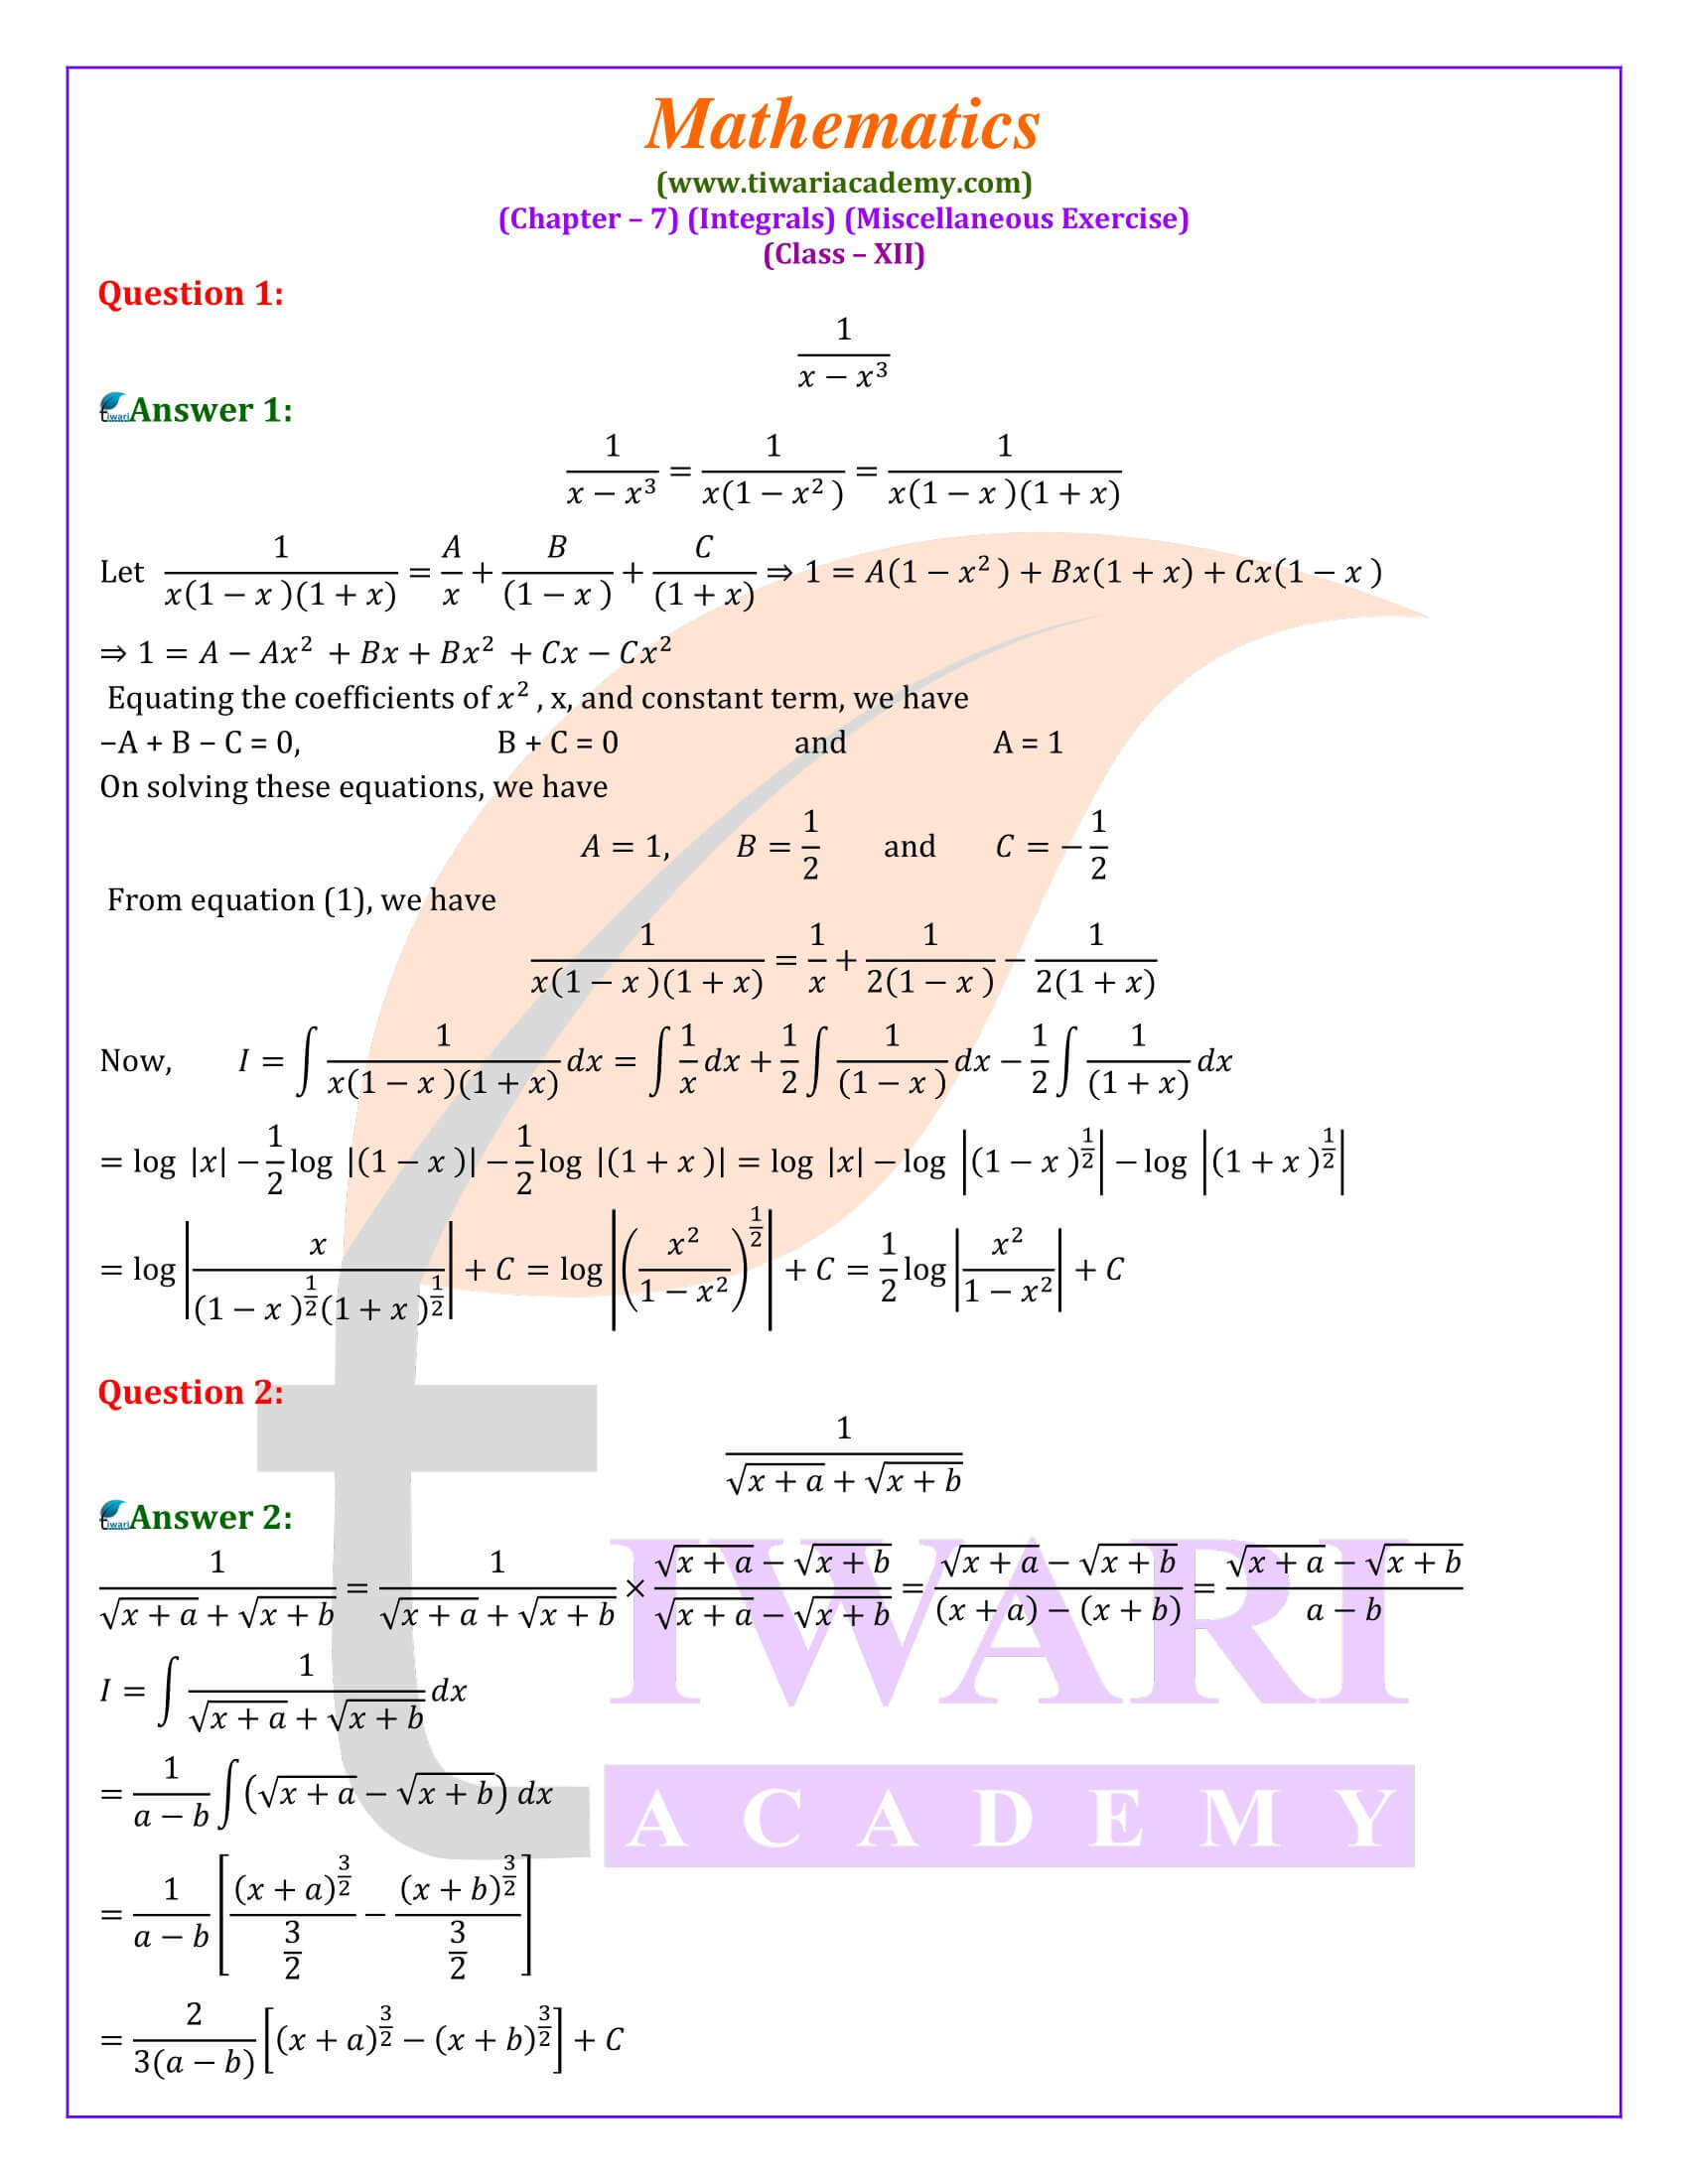 NCERT Solutions for Class 12 Maths Chapter 7 Miscellaneous Exercise Integrals